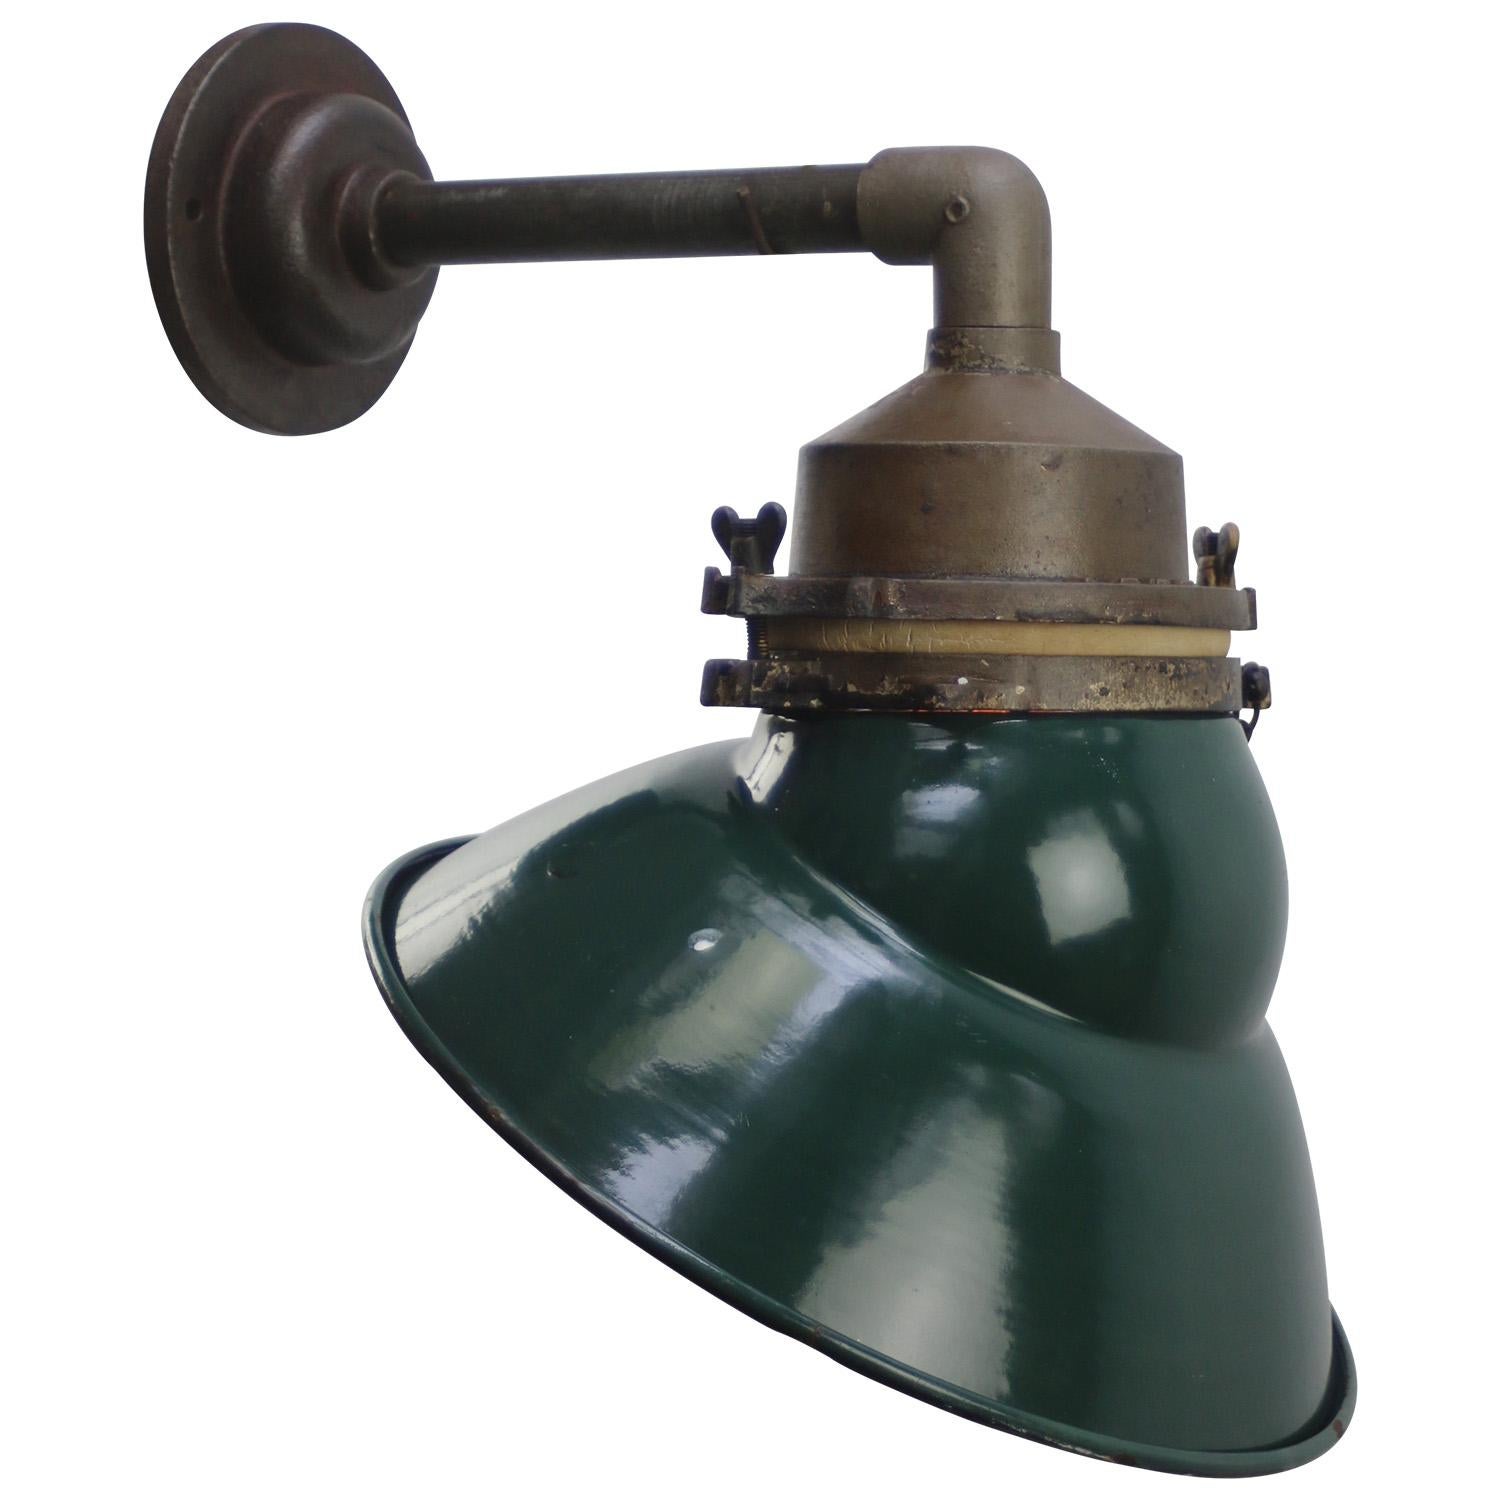 French Vintage industrial wall light by Sammode France
Green enamel, cast iron top and wall plate
Clear glass

Diameter wall mount 10.5 cm / 4”.

Weight: 3.00 kg / 6.6 lb

Priced per individual item. All lamps have been made suitable by